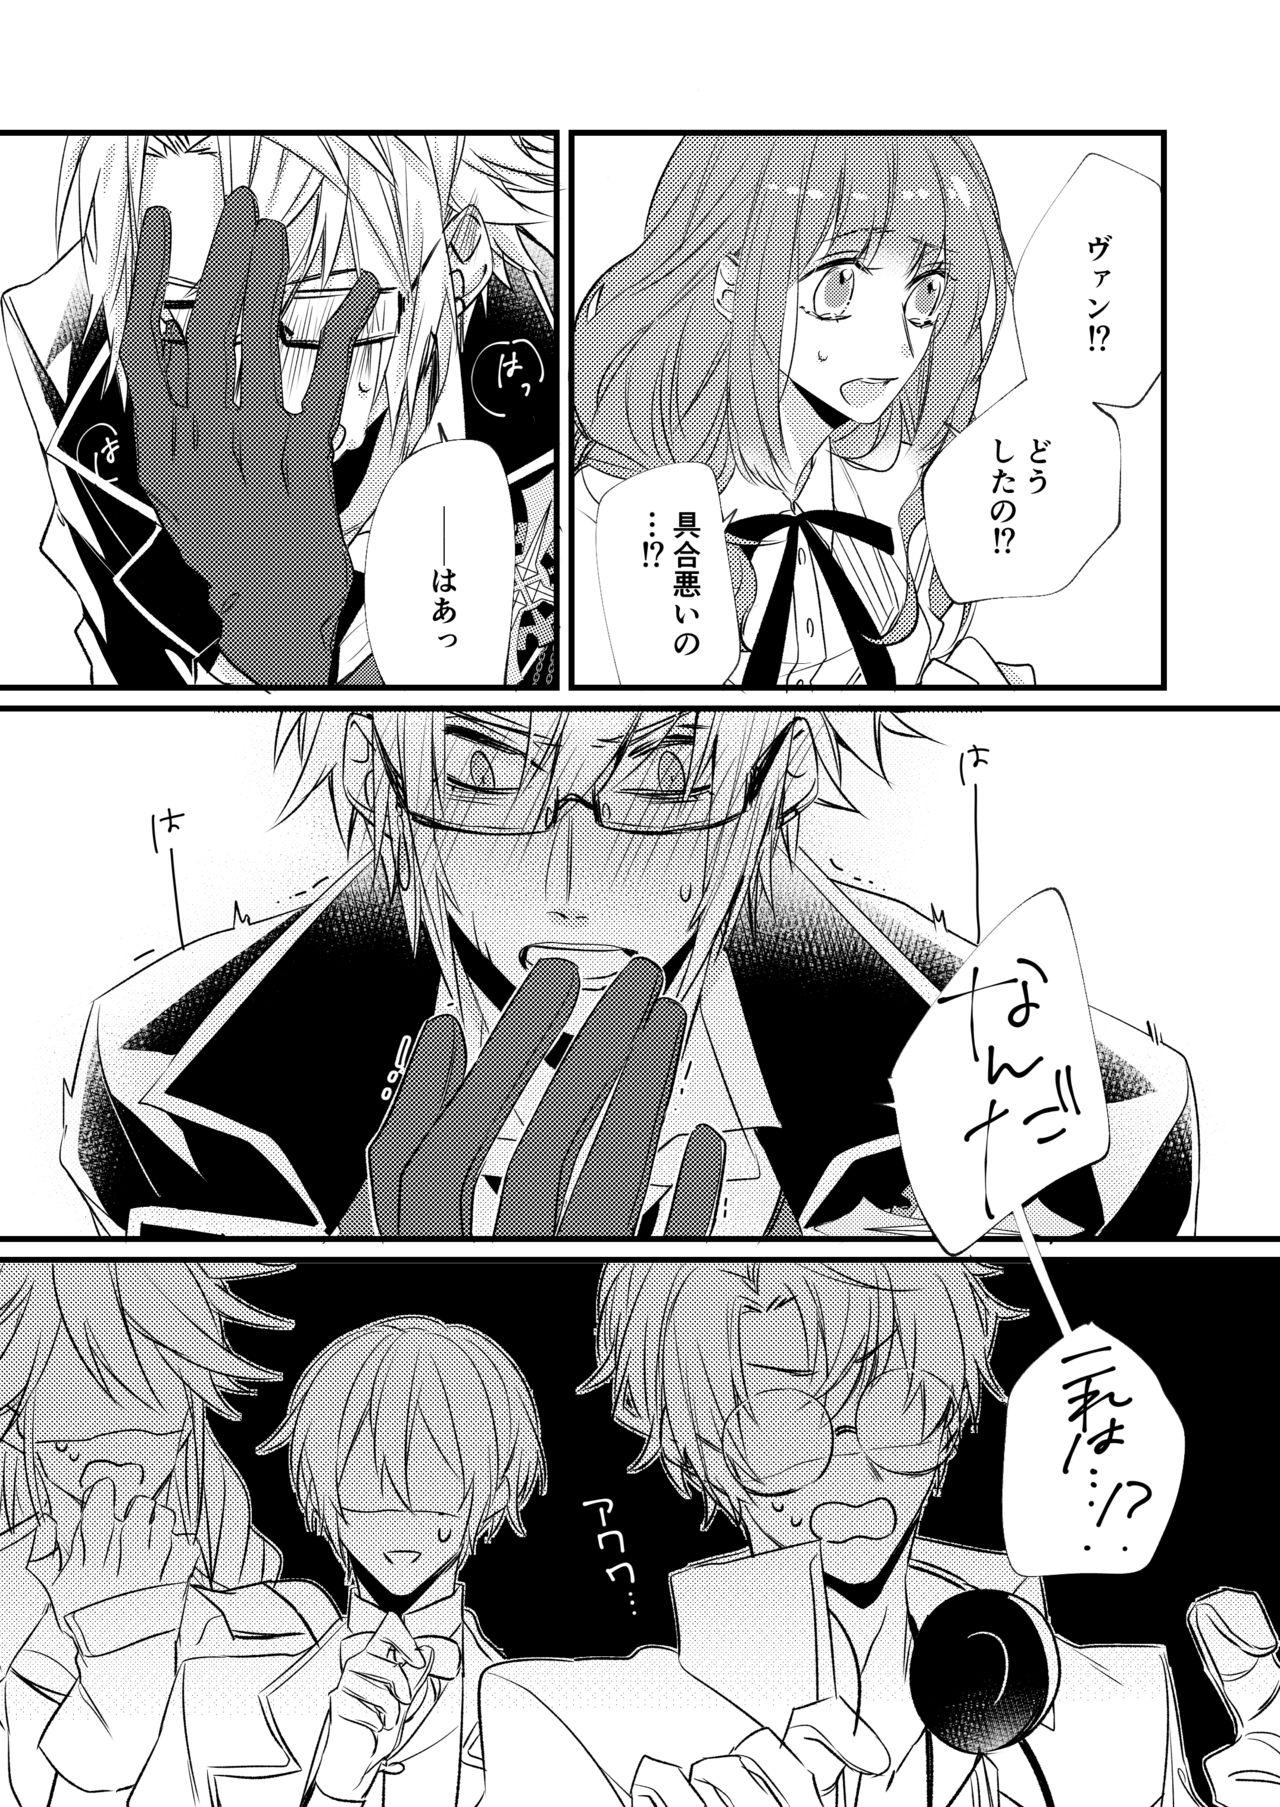 Hardcoresex 熱におぼれる - Code realize sousei no himegimi Amateur Teen - Page 8